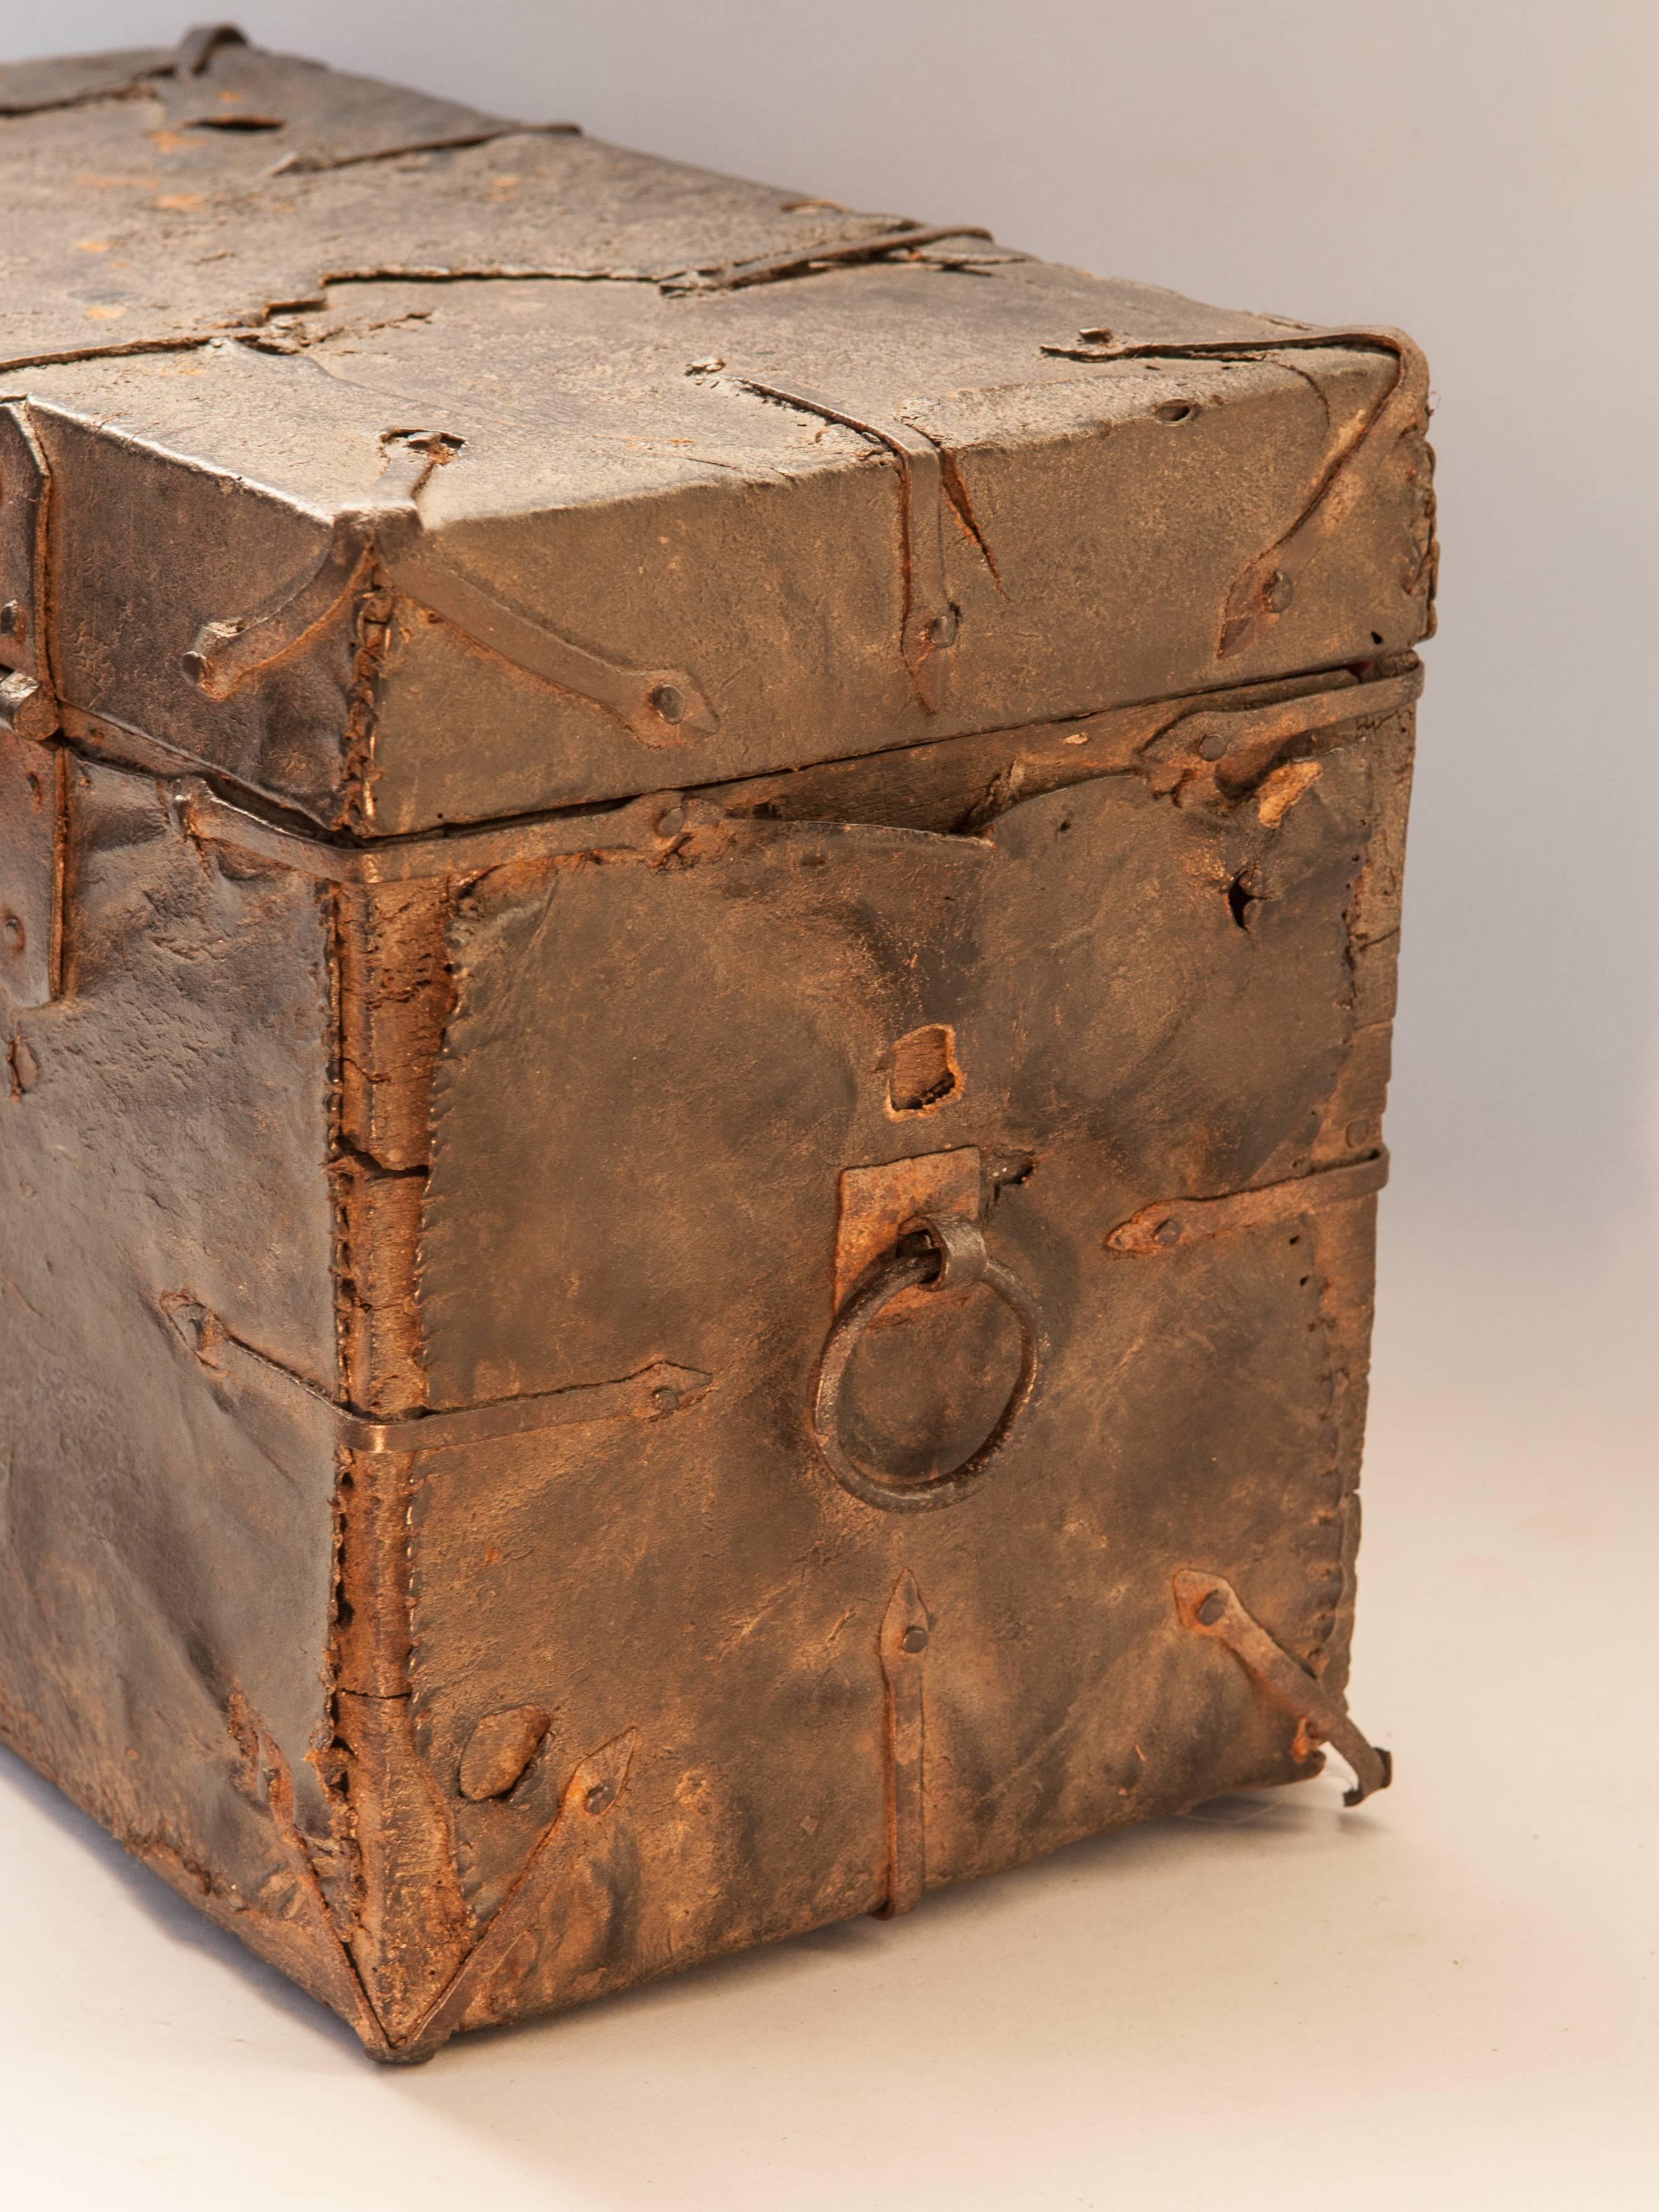 Hand-Crafted Vintage Wooden and Leather Chest from Tibet, Early-Mid 20th Century.